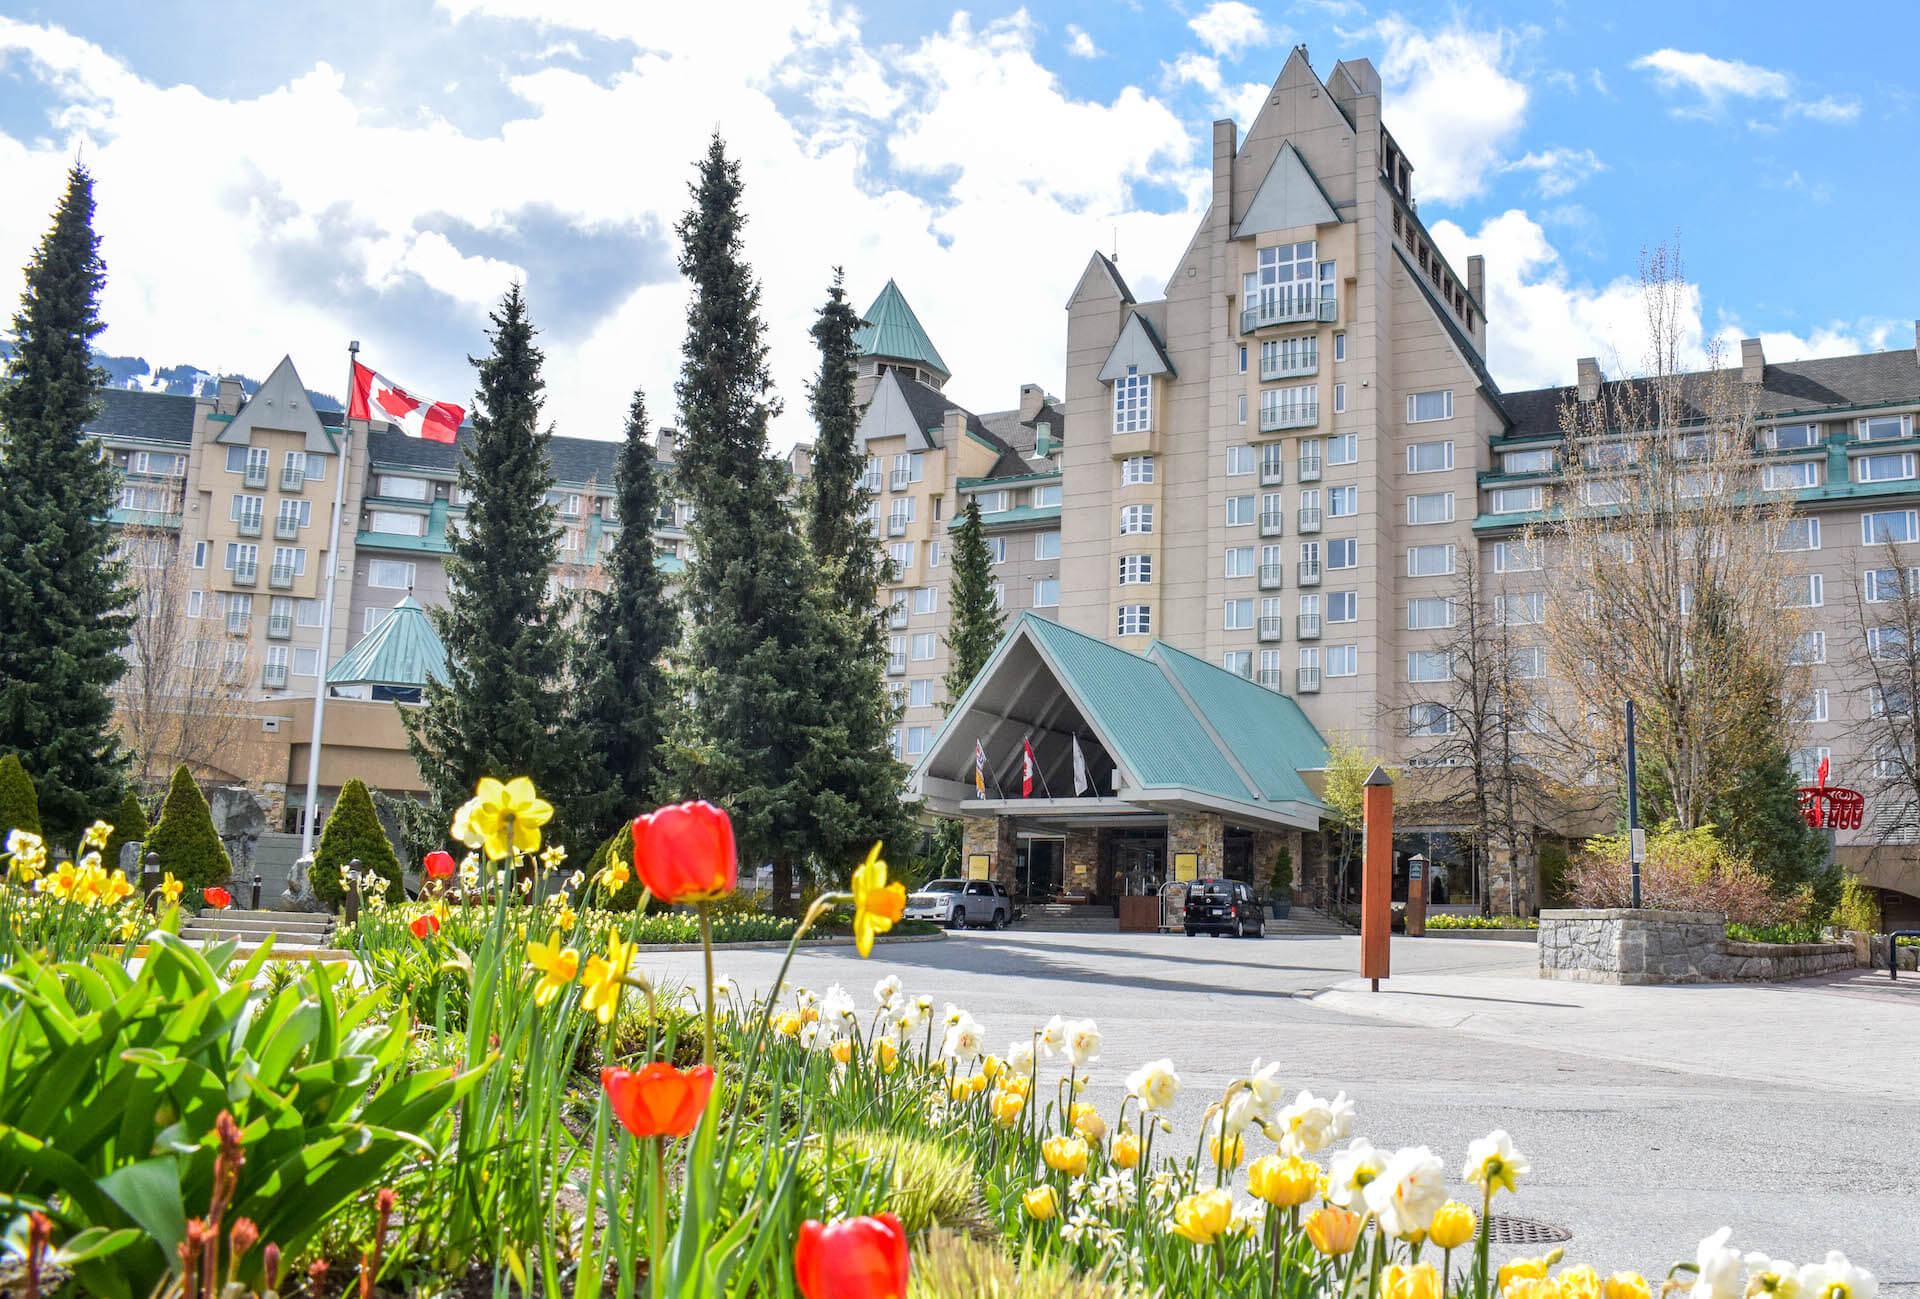 A Chef's Favourite Thing About Spring in Whistler